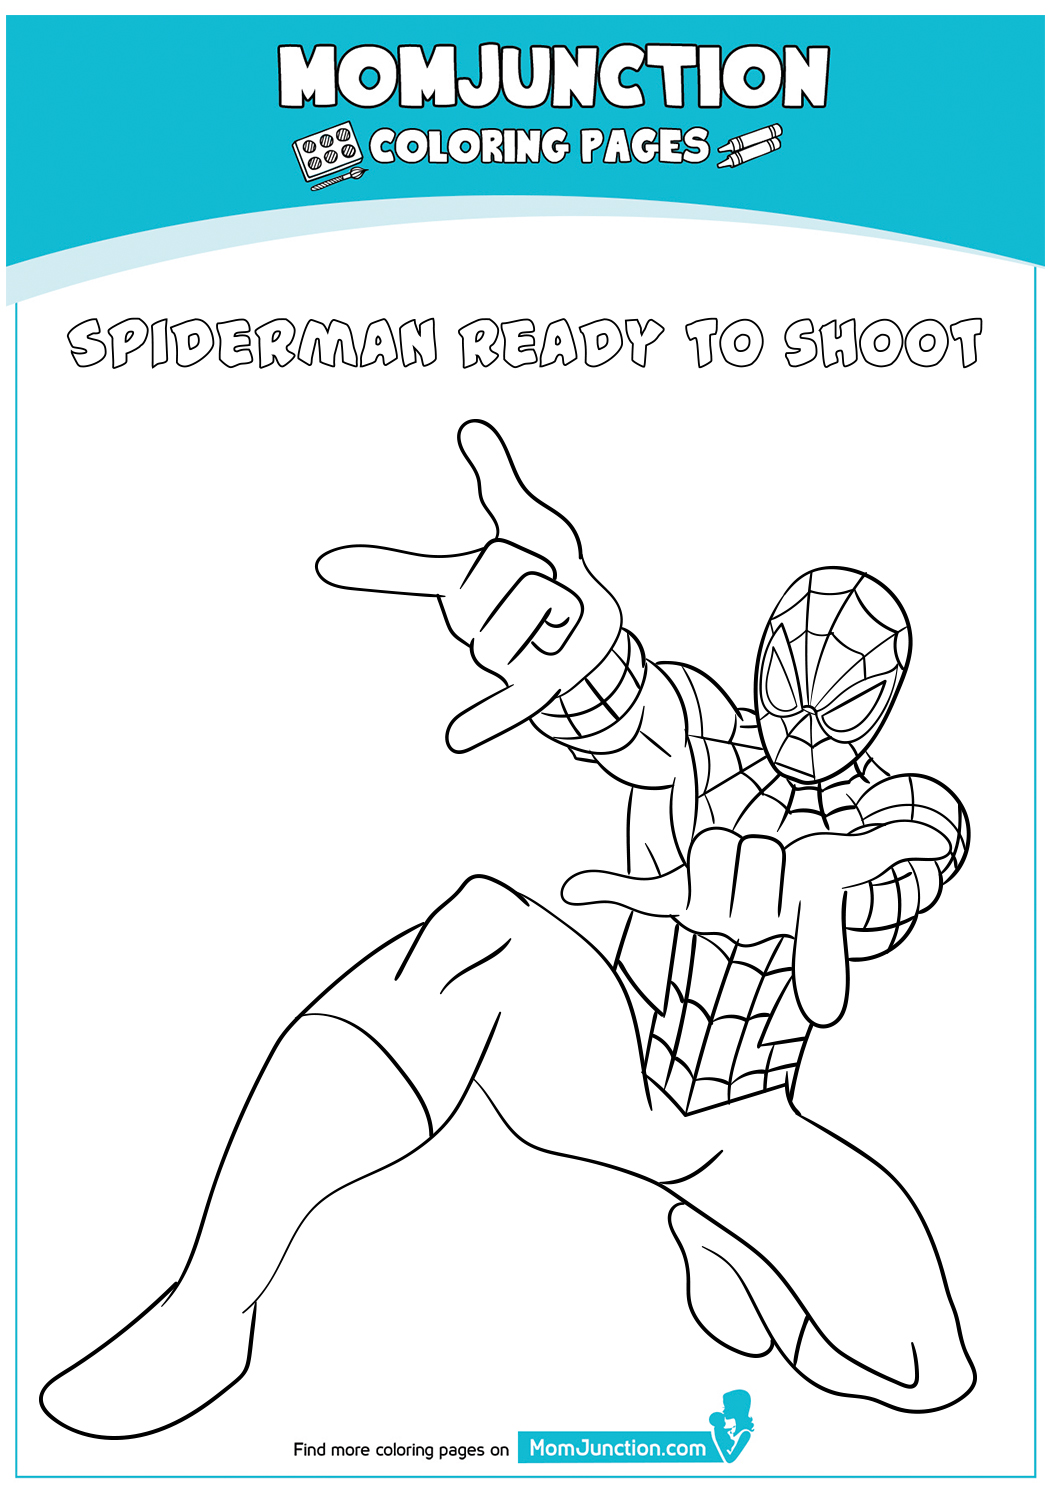 Spiderman-Ready-to-shoot